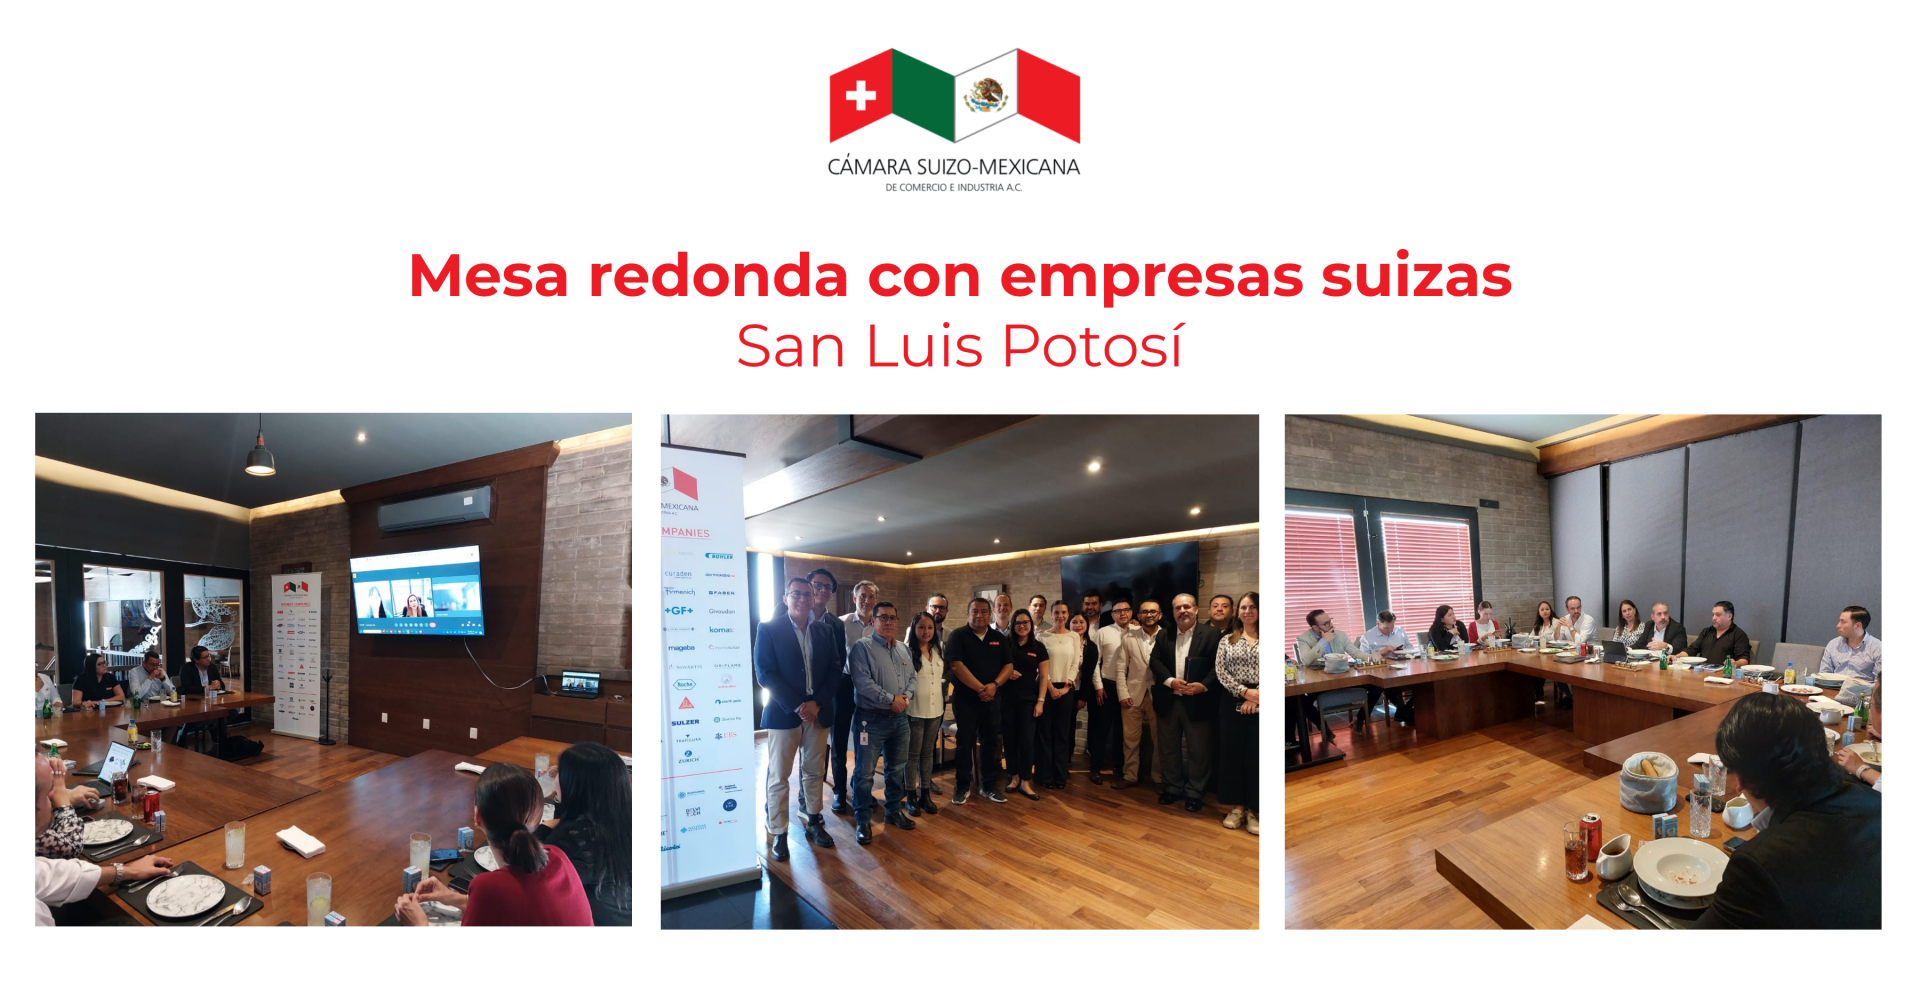 Round table with Swiss companies in San Luis Potosí